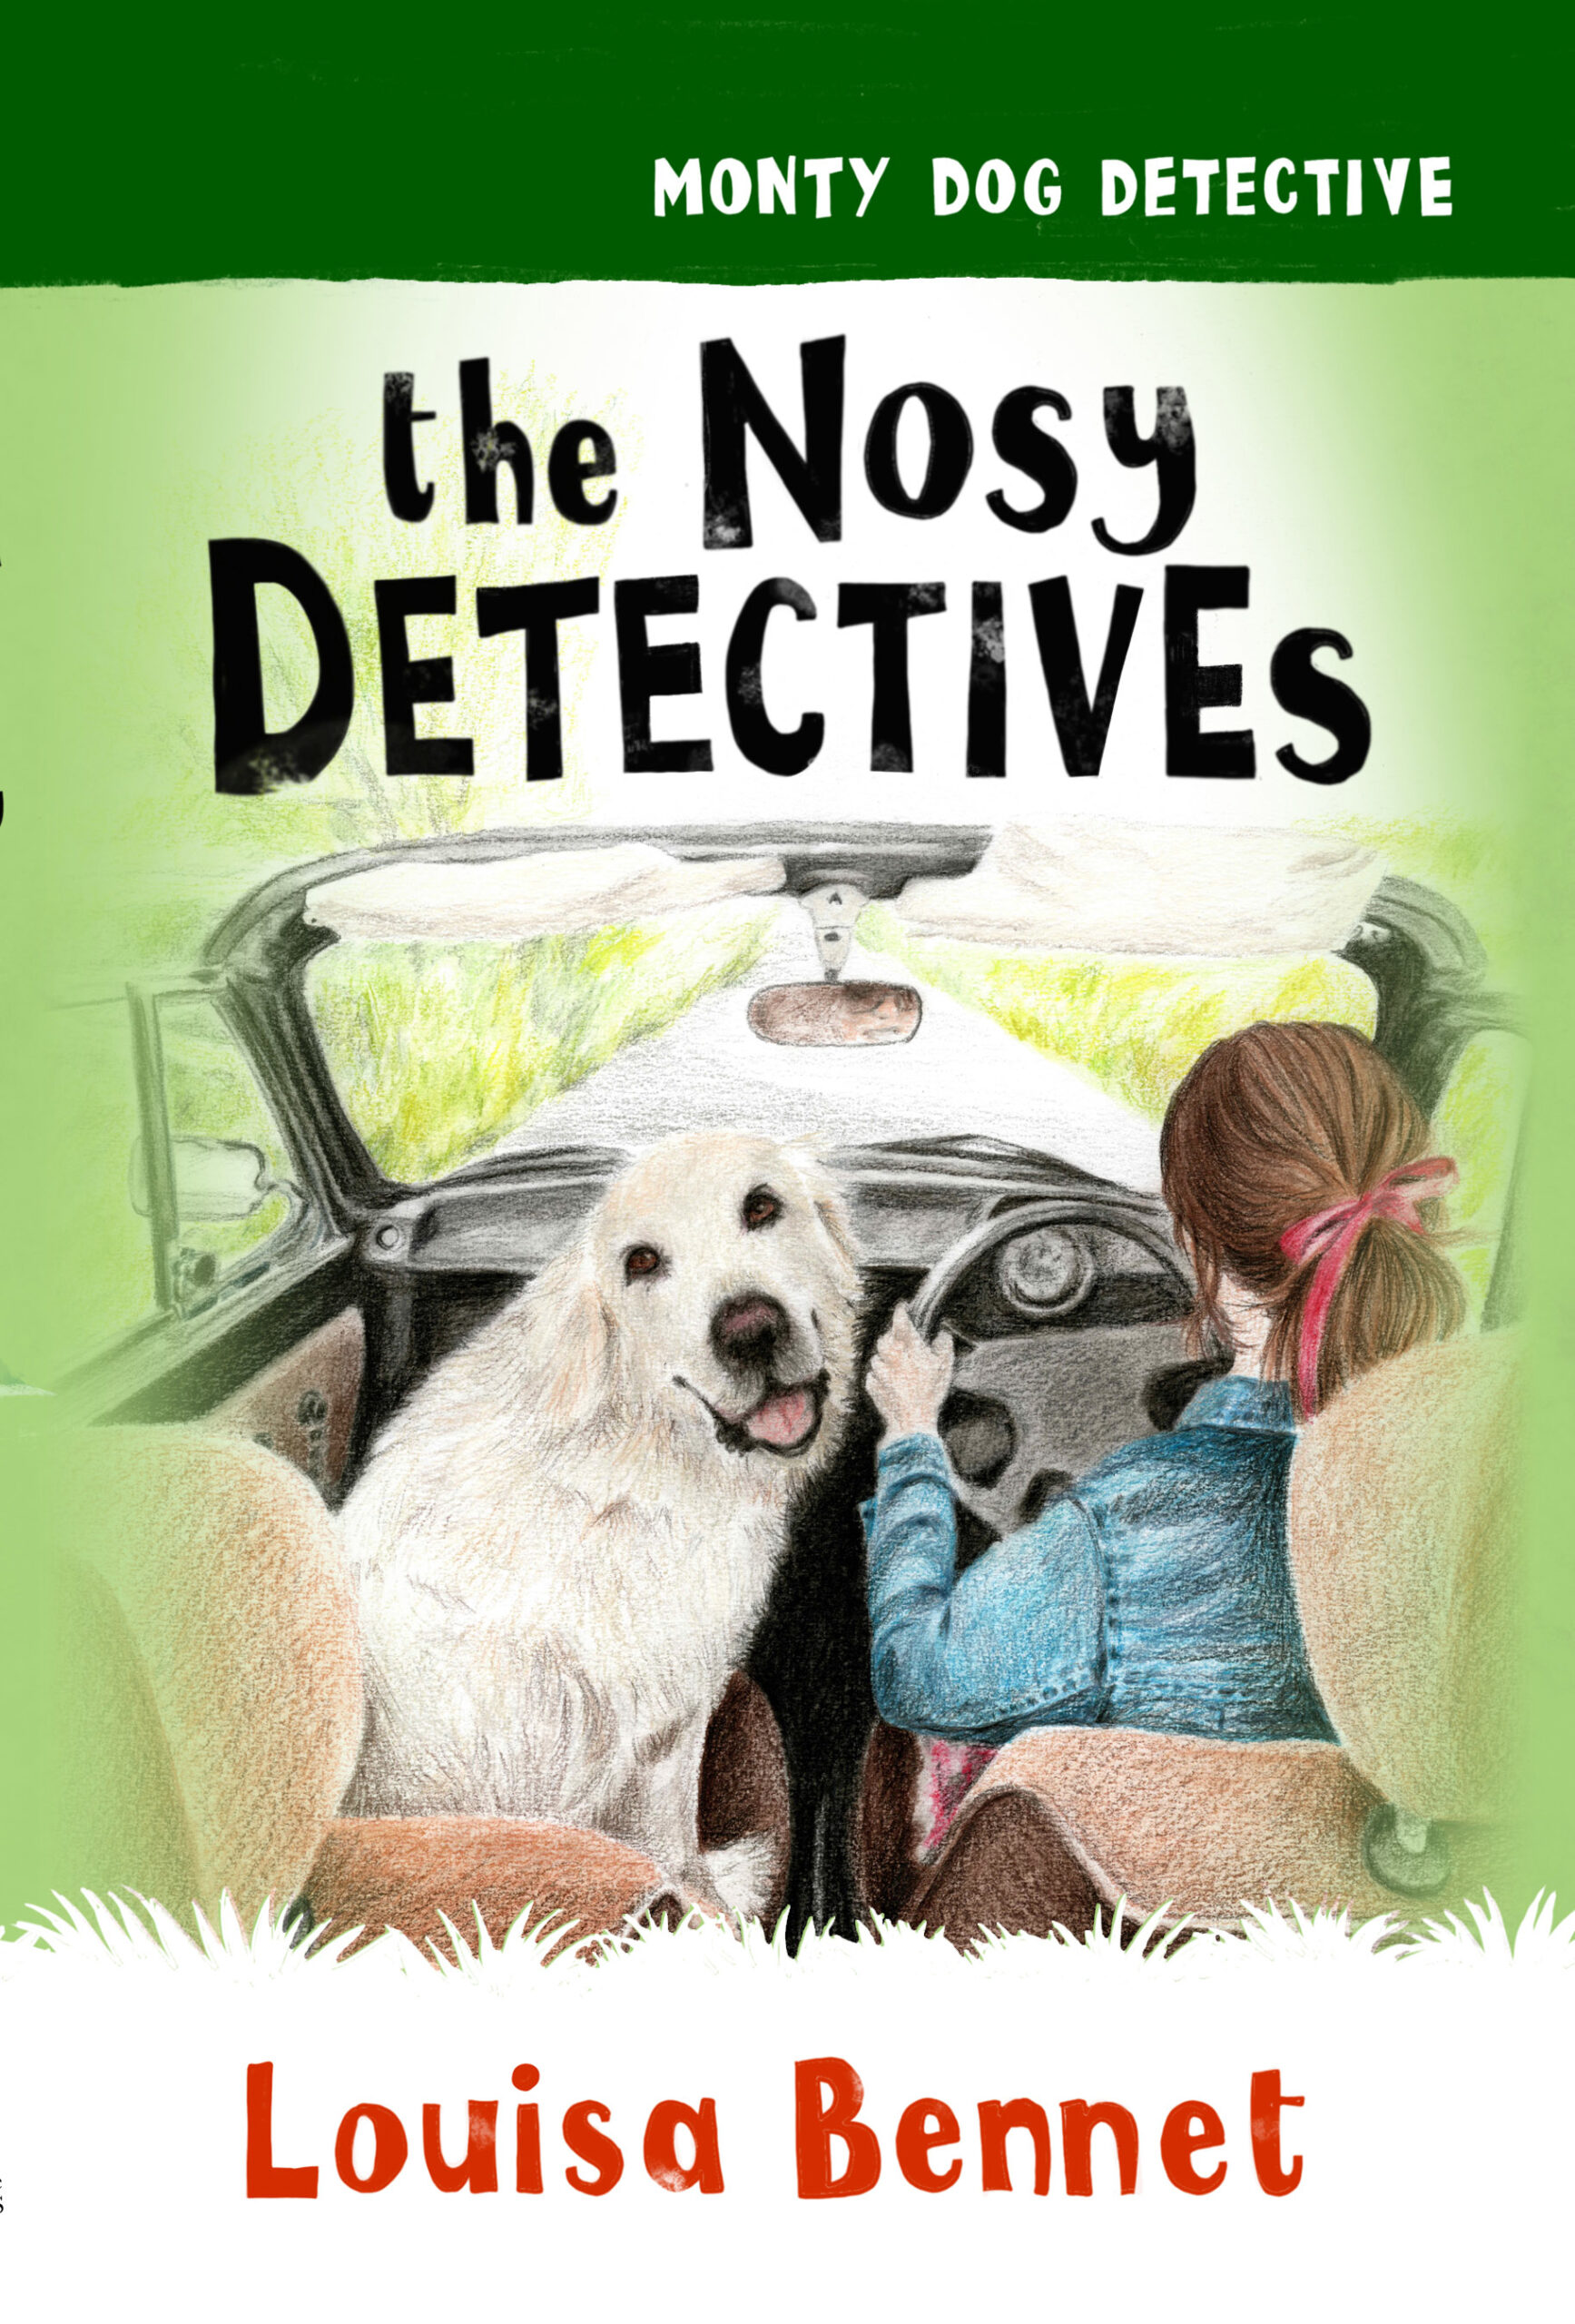 Spoken Word Episode 23: A BARKING MAD MYSTERY, The Nosy Detectives, By Louisa Bennet